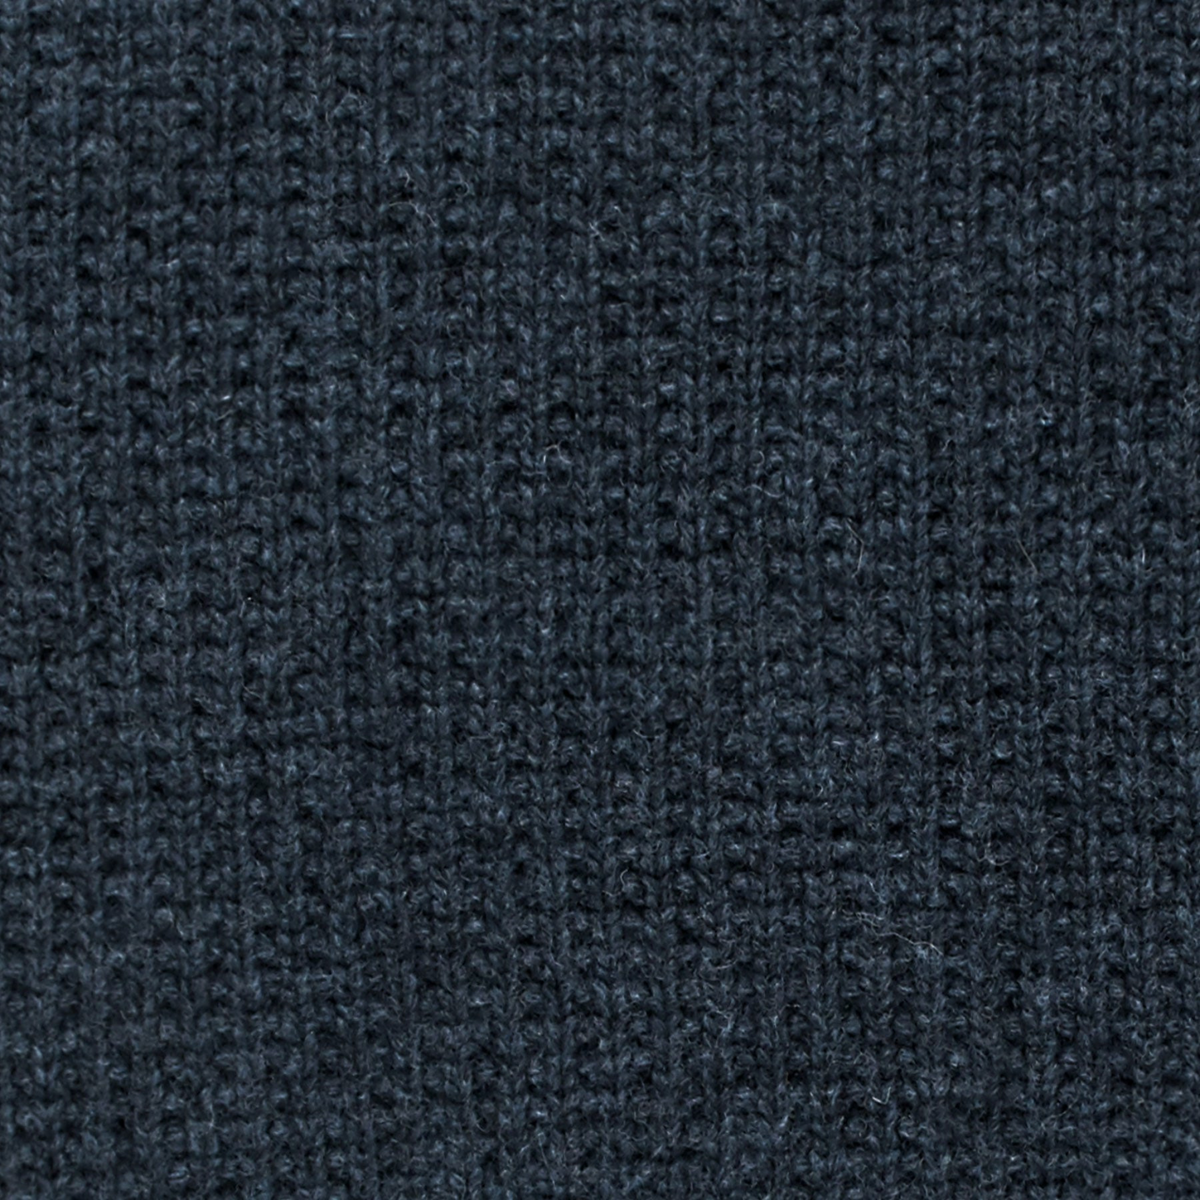 Swatch Sample of Sferra Pettra Throw Blanket in Midnight Color